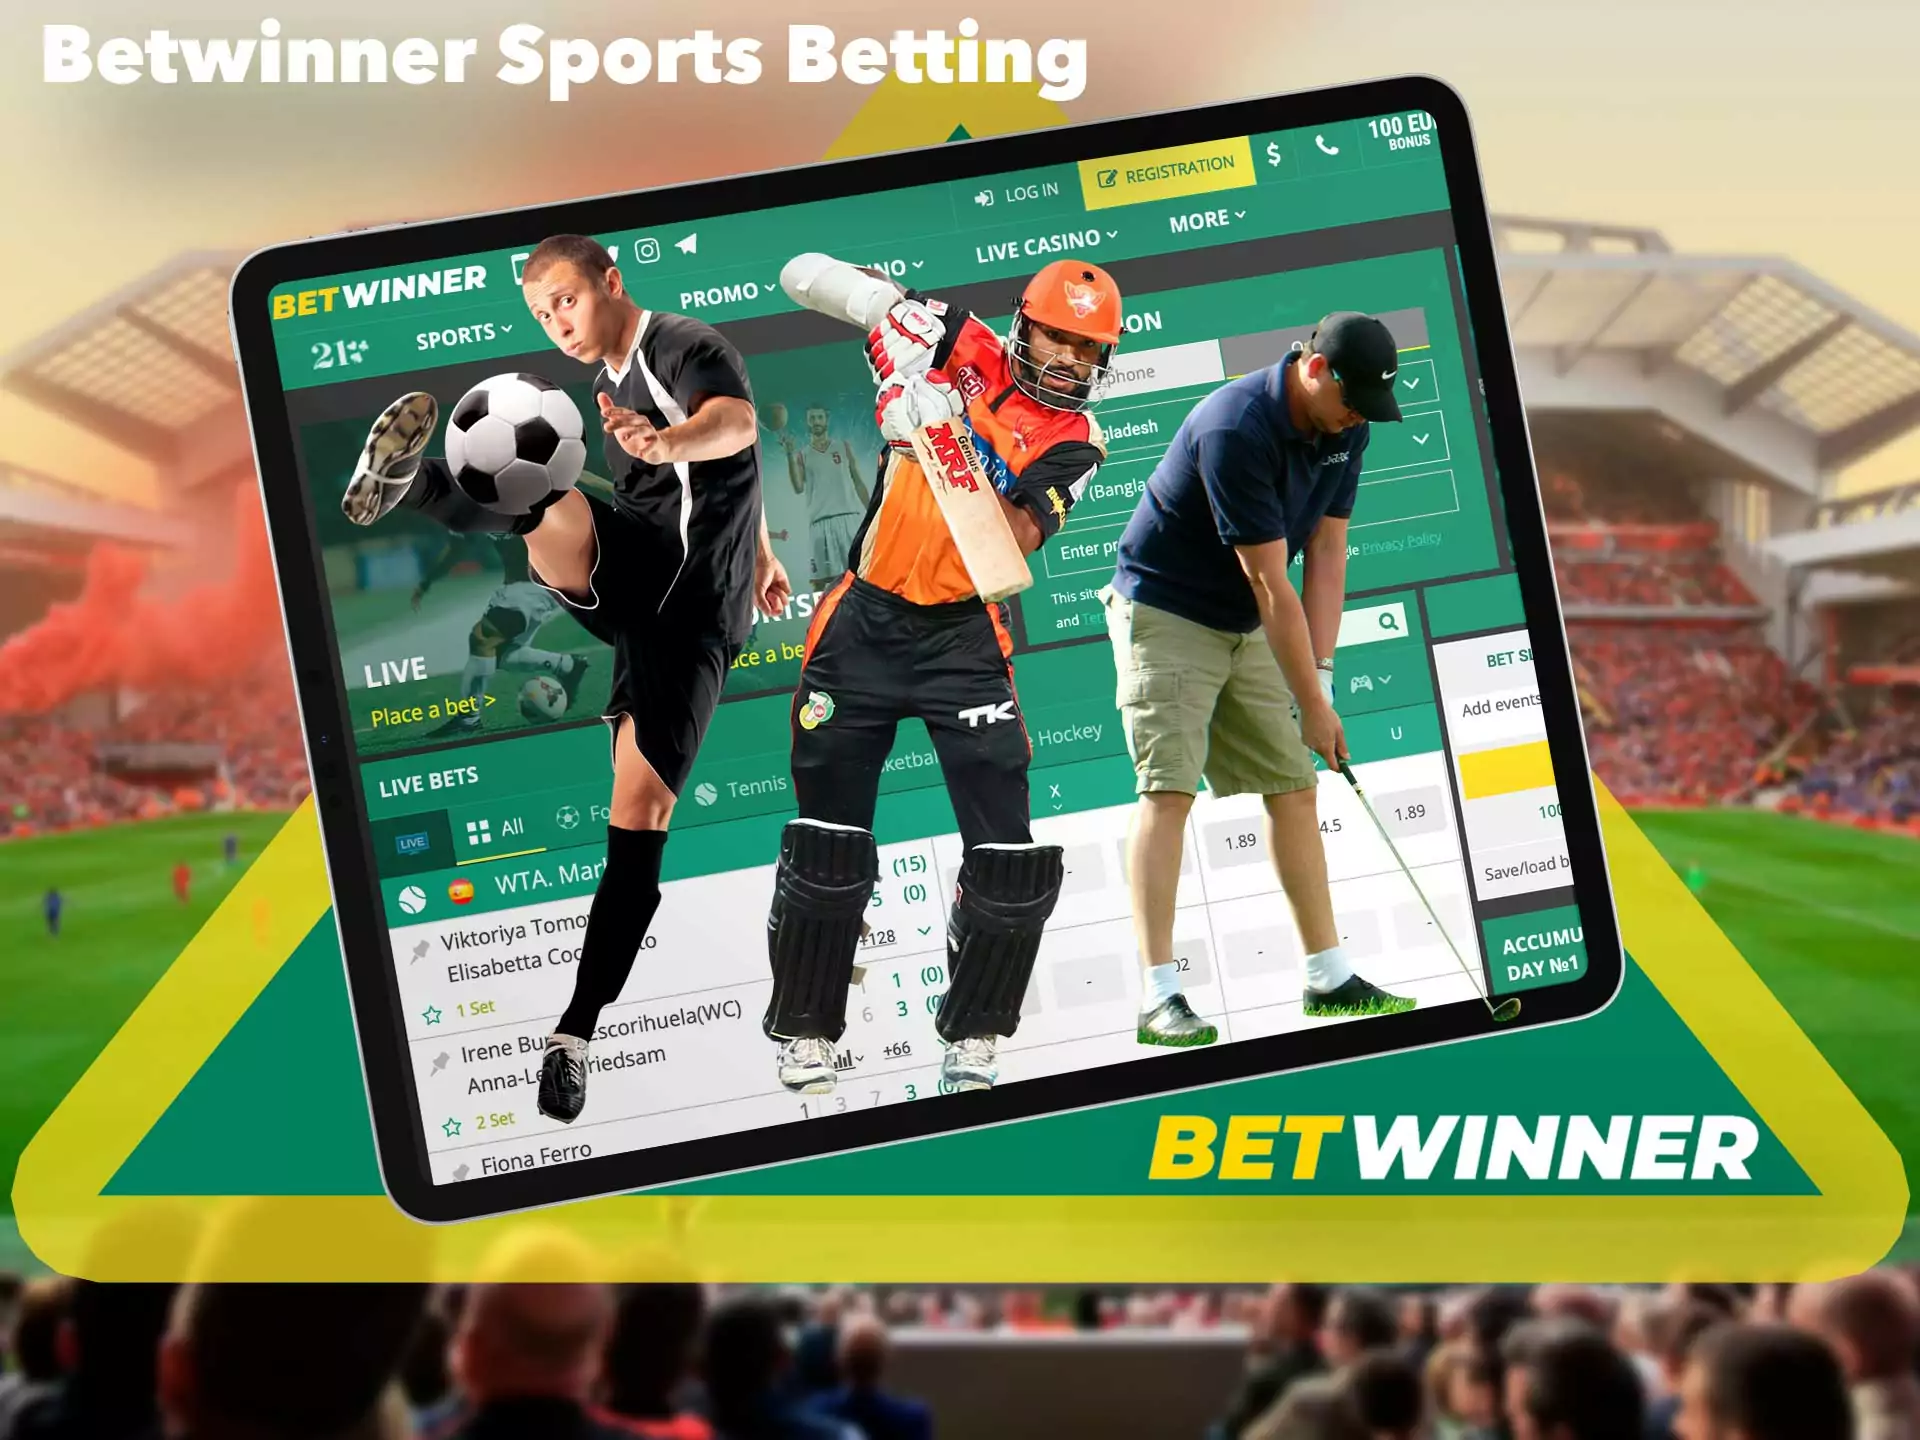 The sports tab is the main advantage of Betwinner as it has a rich selection of sports disciplines.